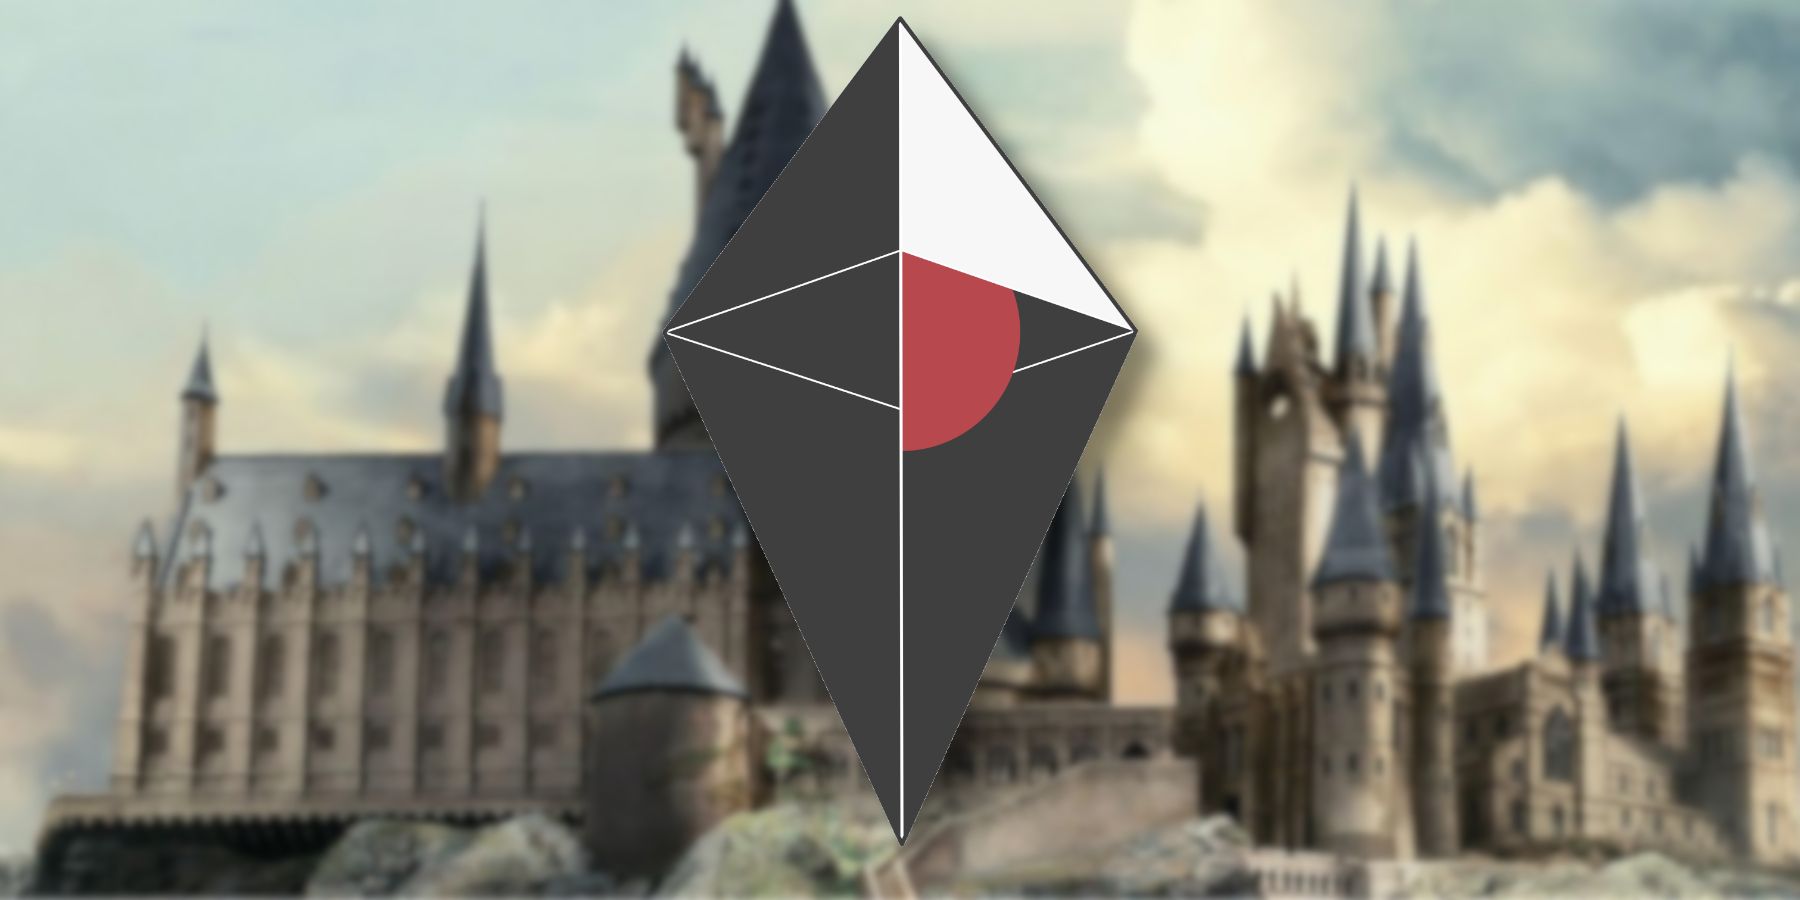 The No Man's Sky logo with Hogwarts from Harry Potter in the background.